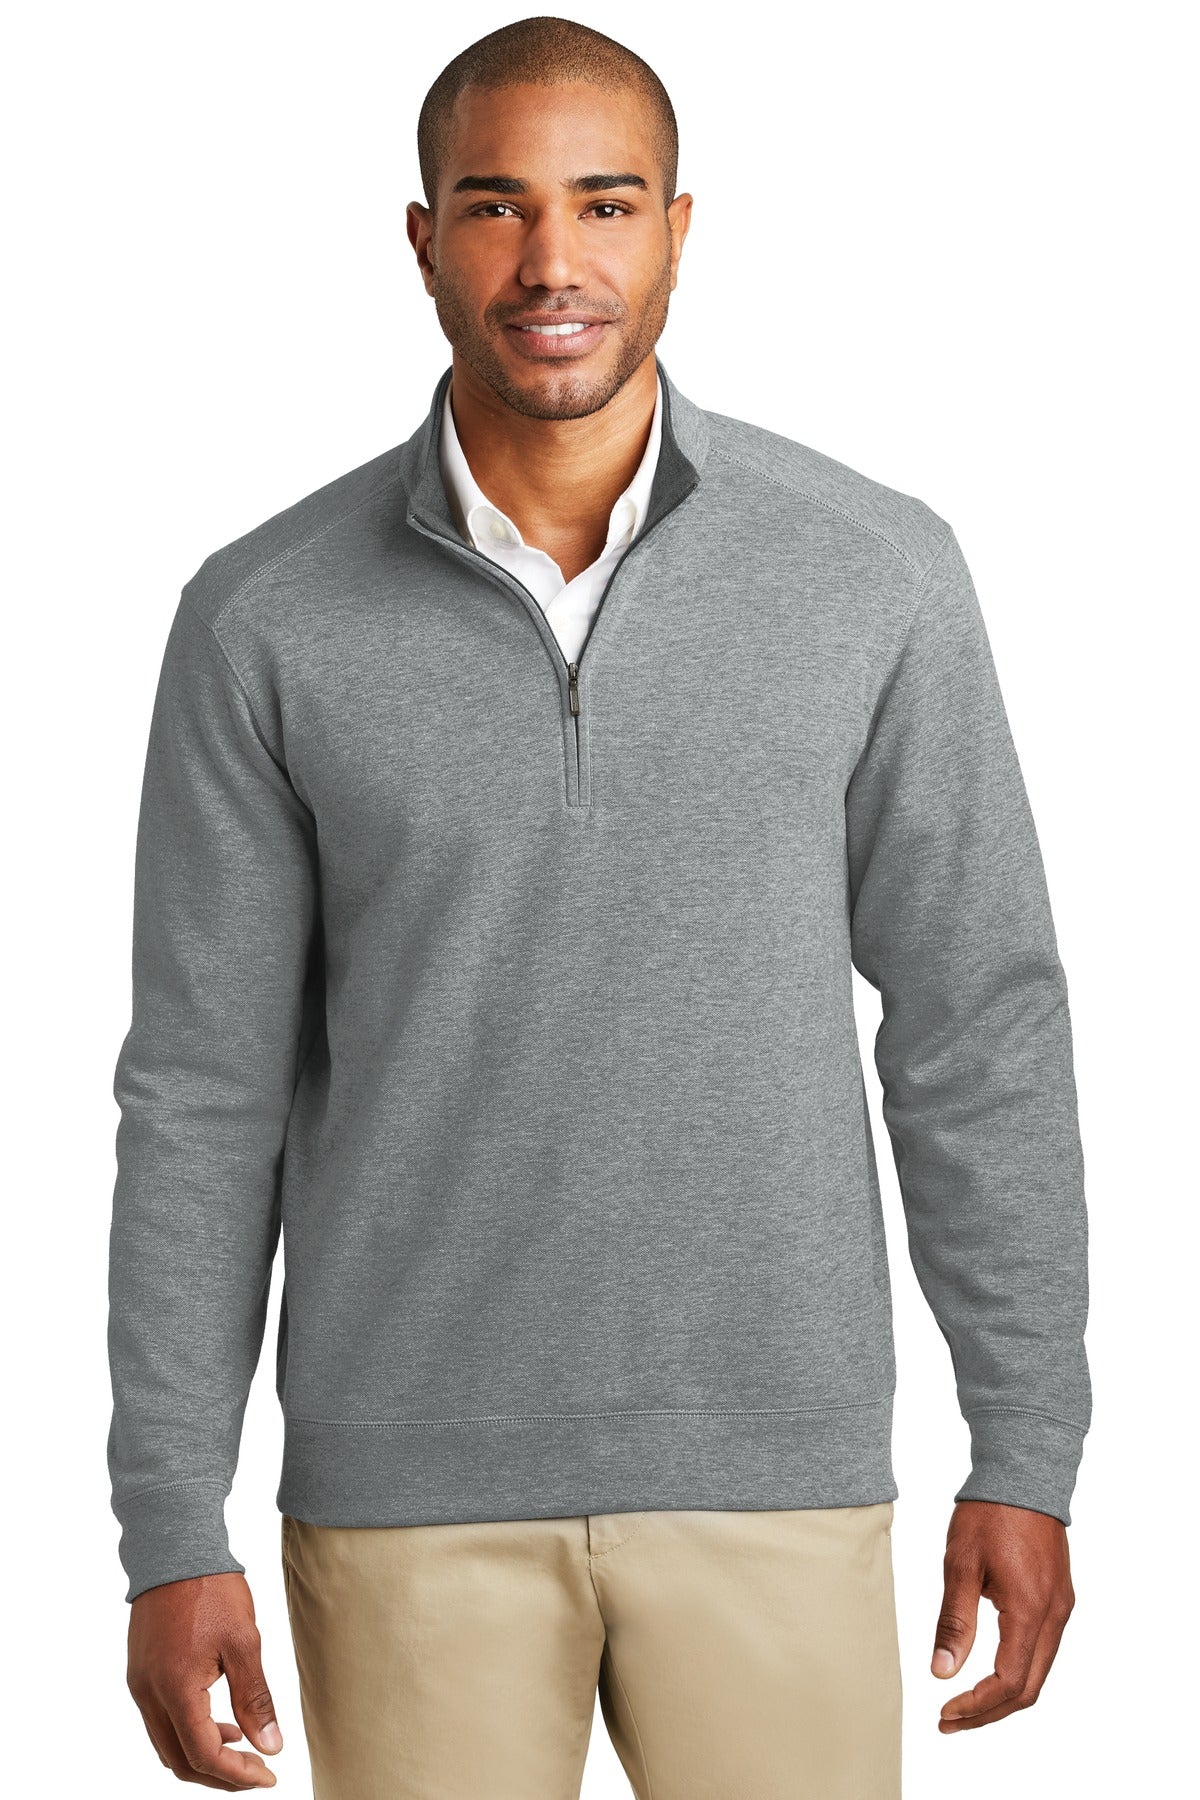 Photo of Port Authority Polos/Knits K807  color  Medium Heather Grey/ Charcoal Heather